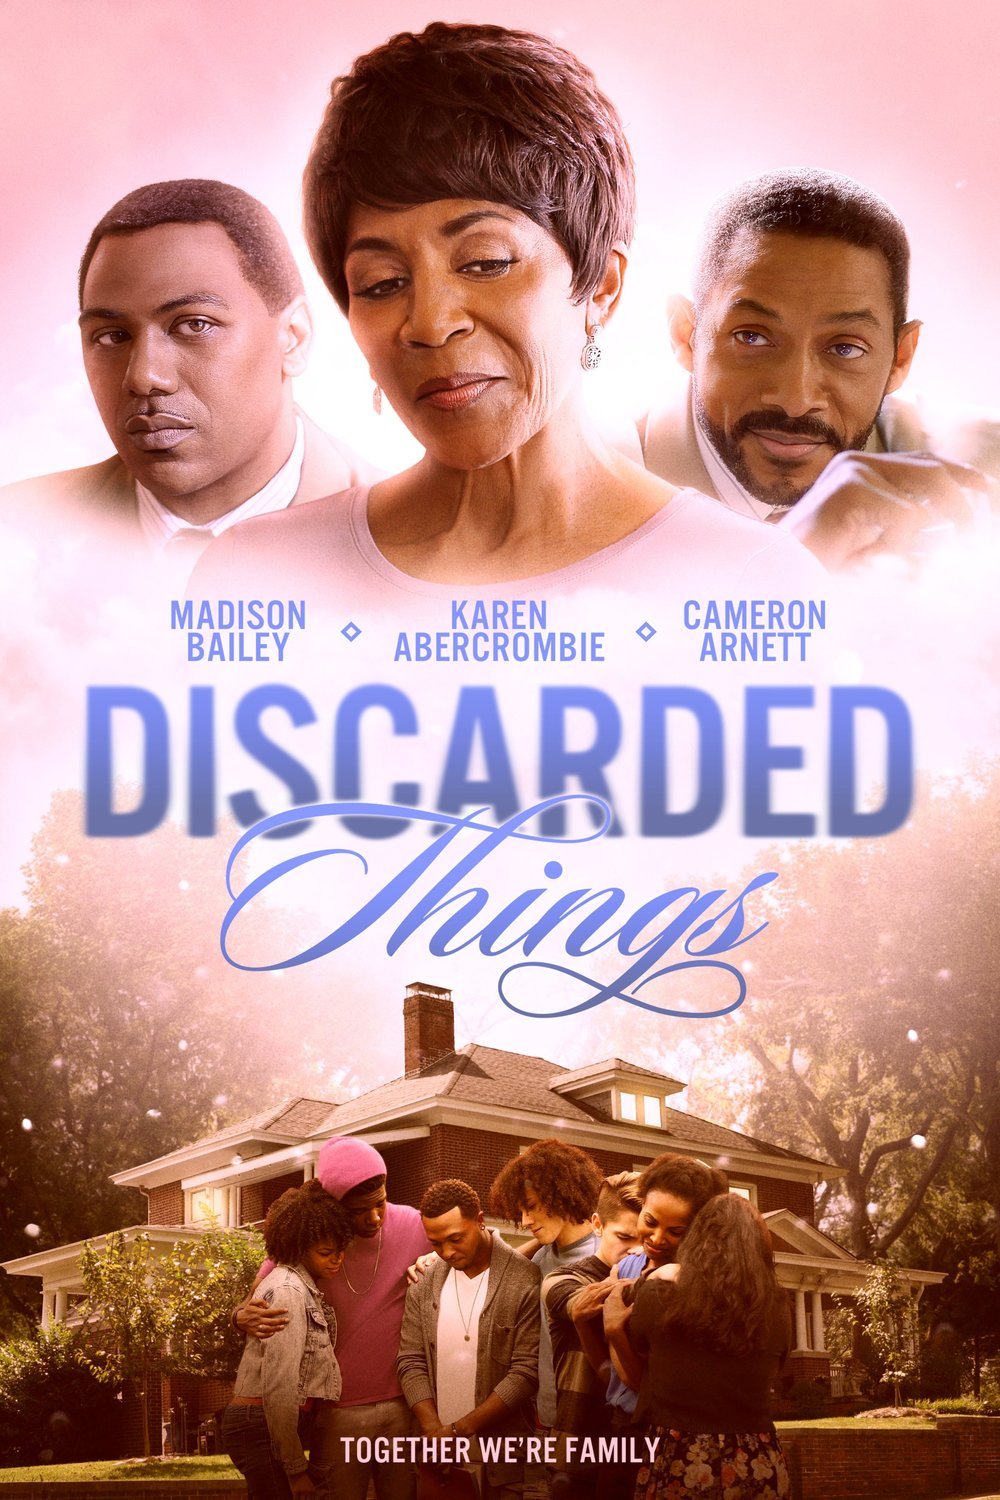 Poster of the movie Discarded Things